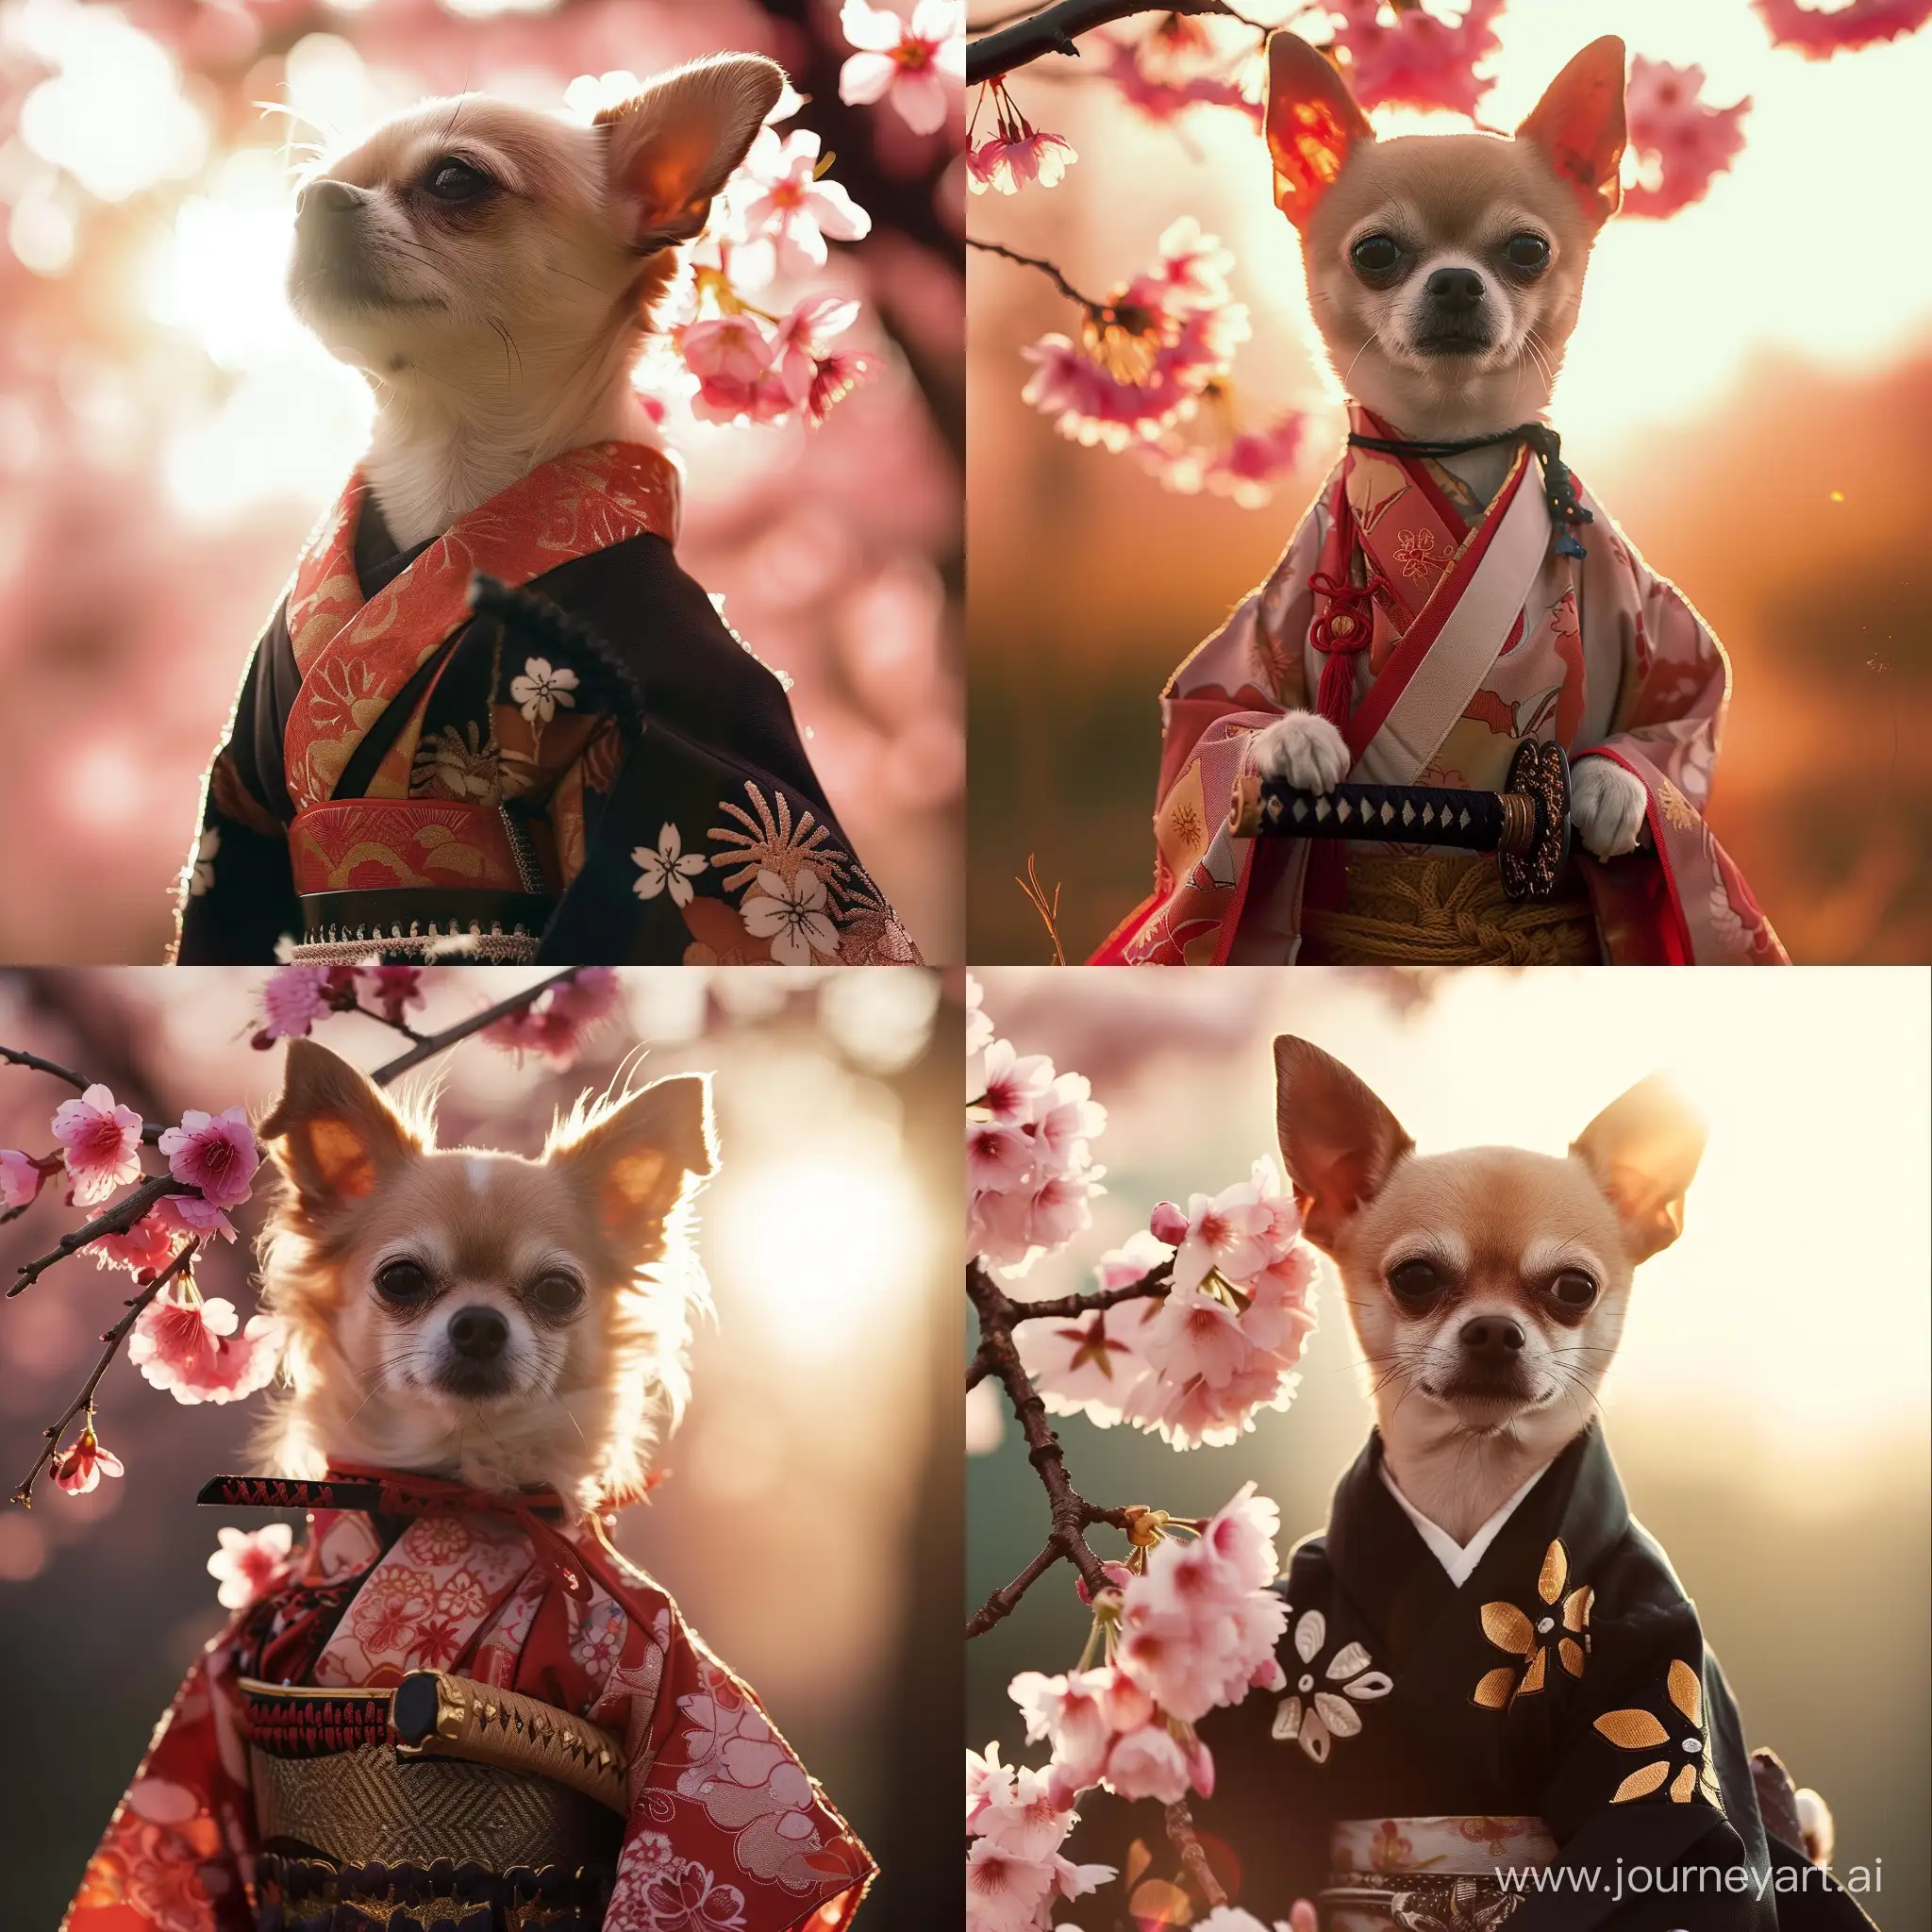 Adorable-Chihuahua-Samurai-Poses-Under-Cherry-Blossoms-in-Sunlight